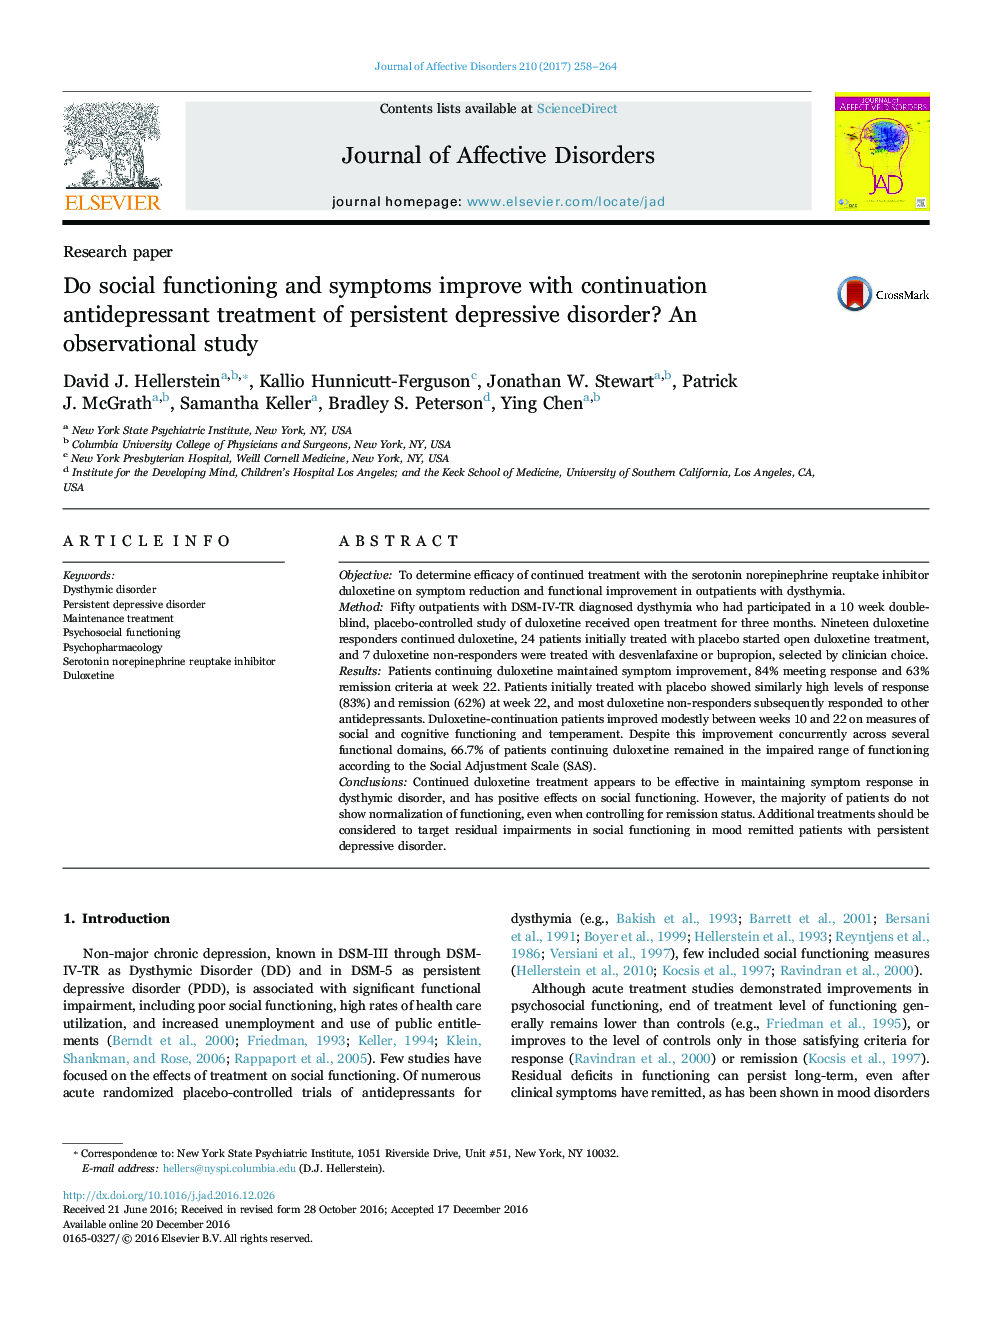 Research paperDo social functioning and symptoms improve with continuation antidepressant treatment of persistent depressive disorder? An observational study